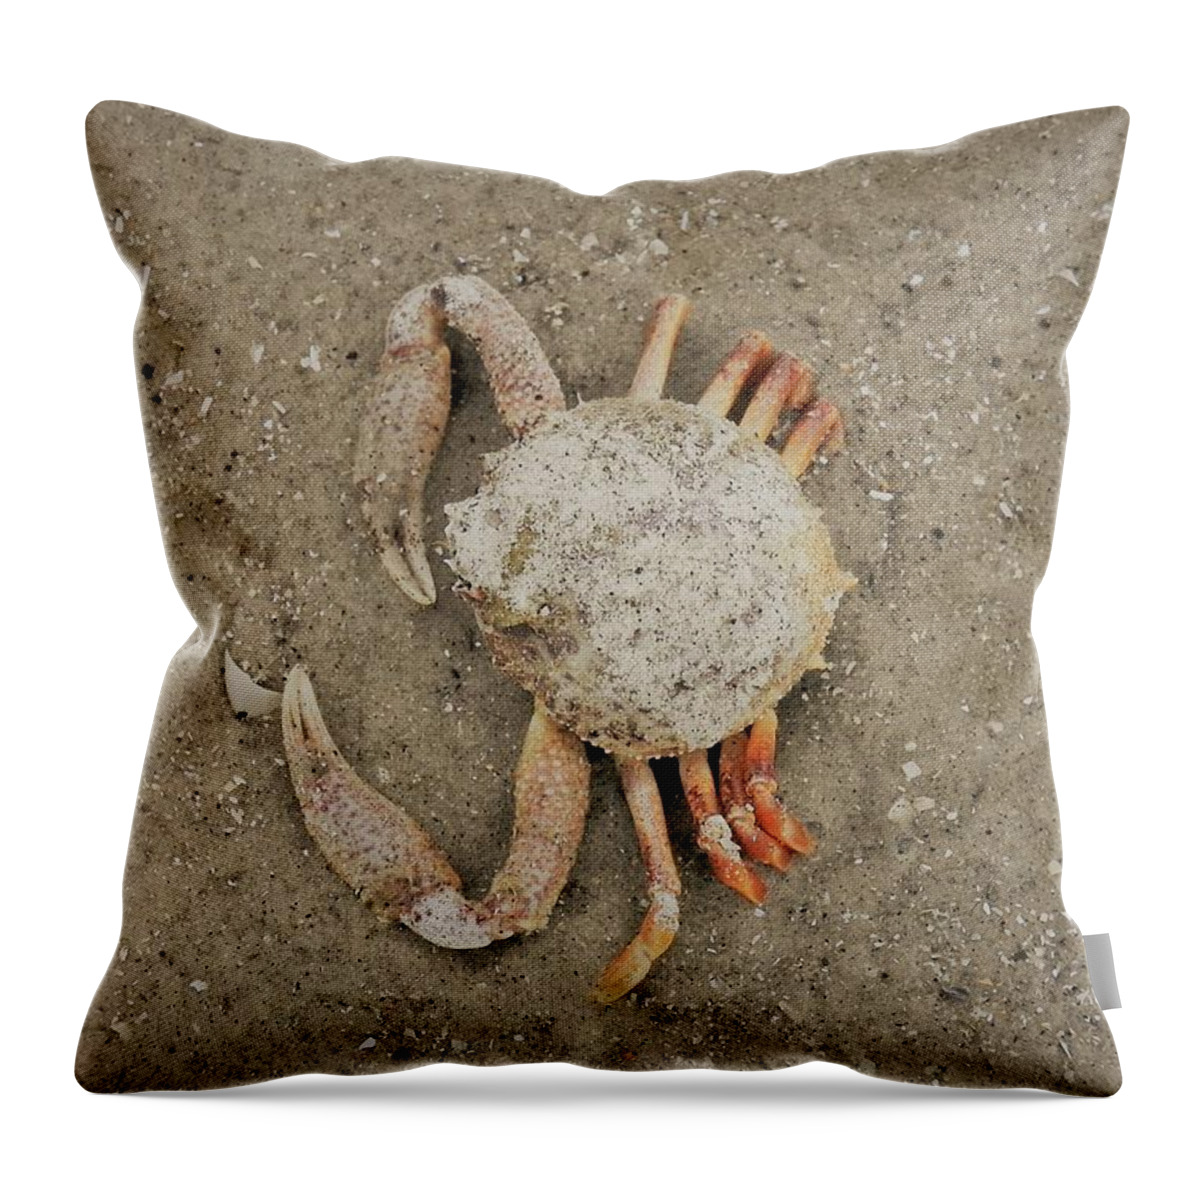 Crab Throw Pillow featuring the photograph Odd Crab by Patricia Greer